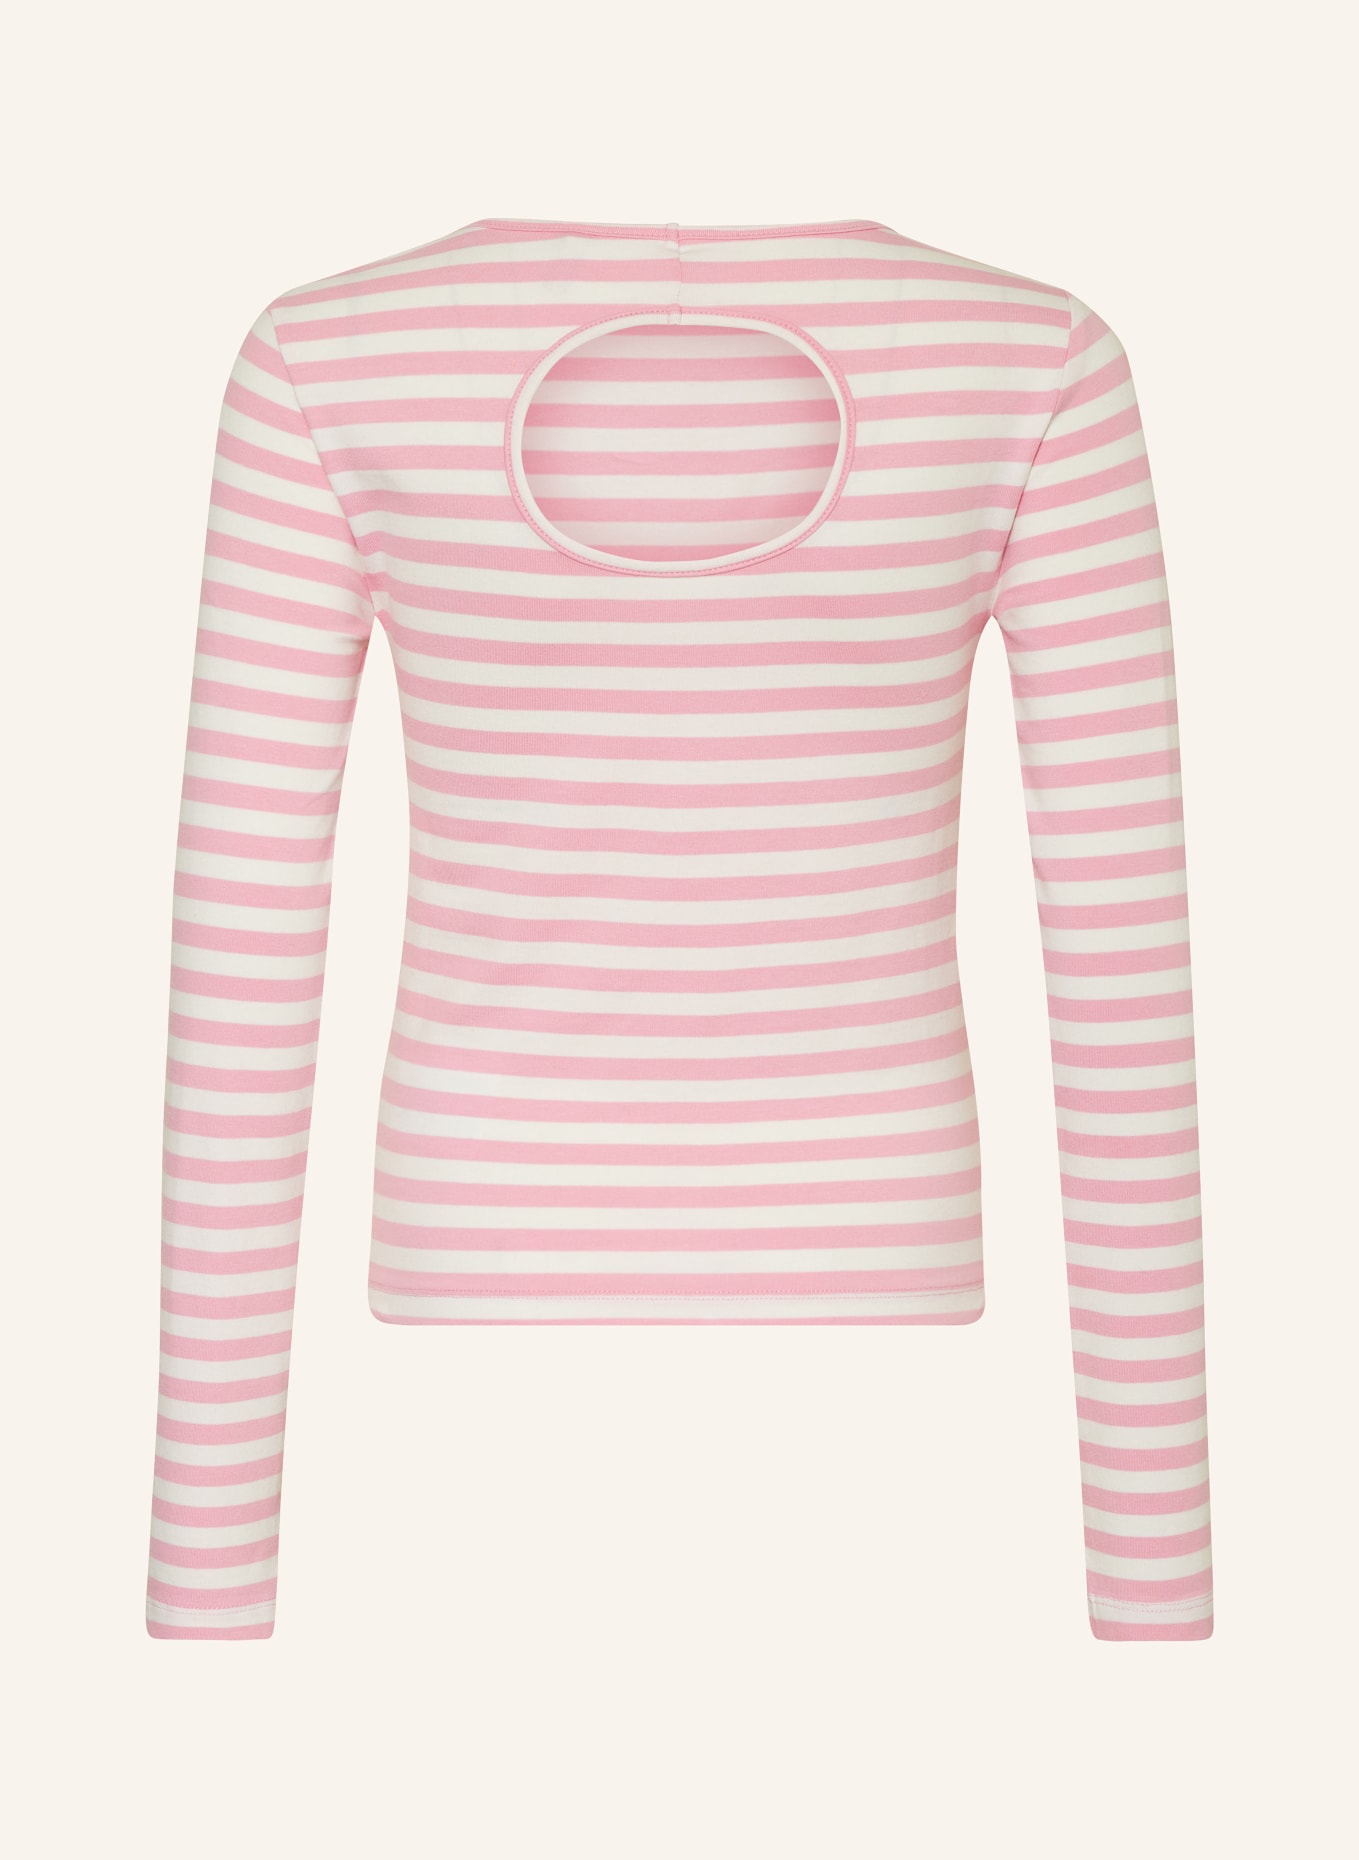 ONLY Longsleeve mit Cut-out, Farbe: WEISS/ ROSA (Bild 2)